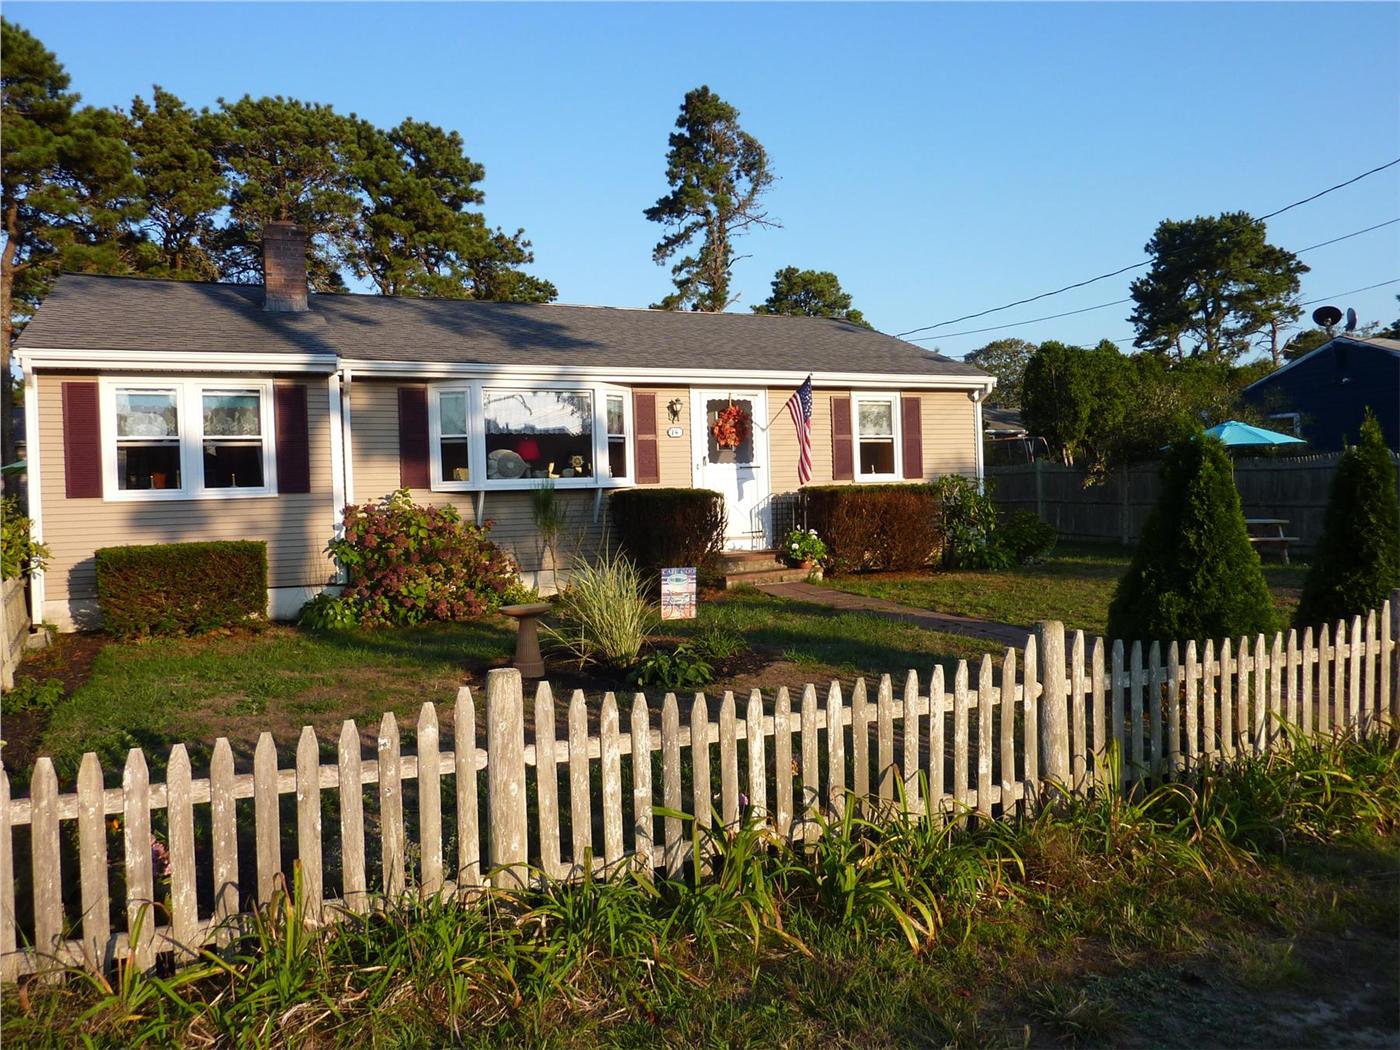 Dennis Vacation Rental home in Cape Cod MA 02639  ID 22615